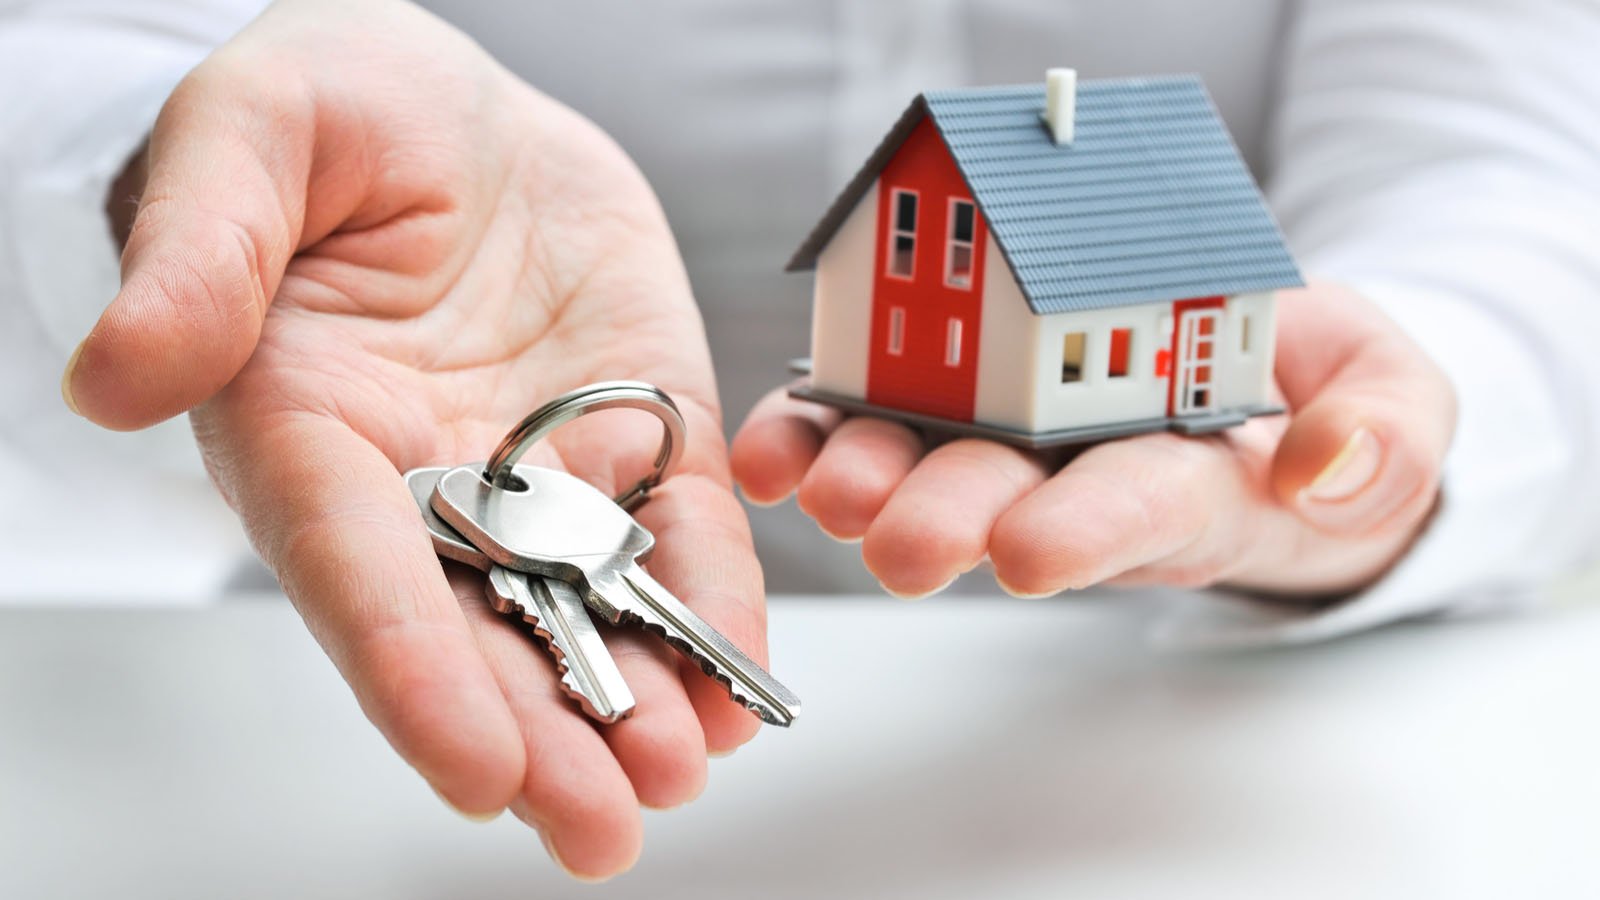 Hands holding a miniature house and keys